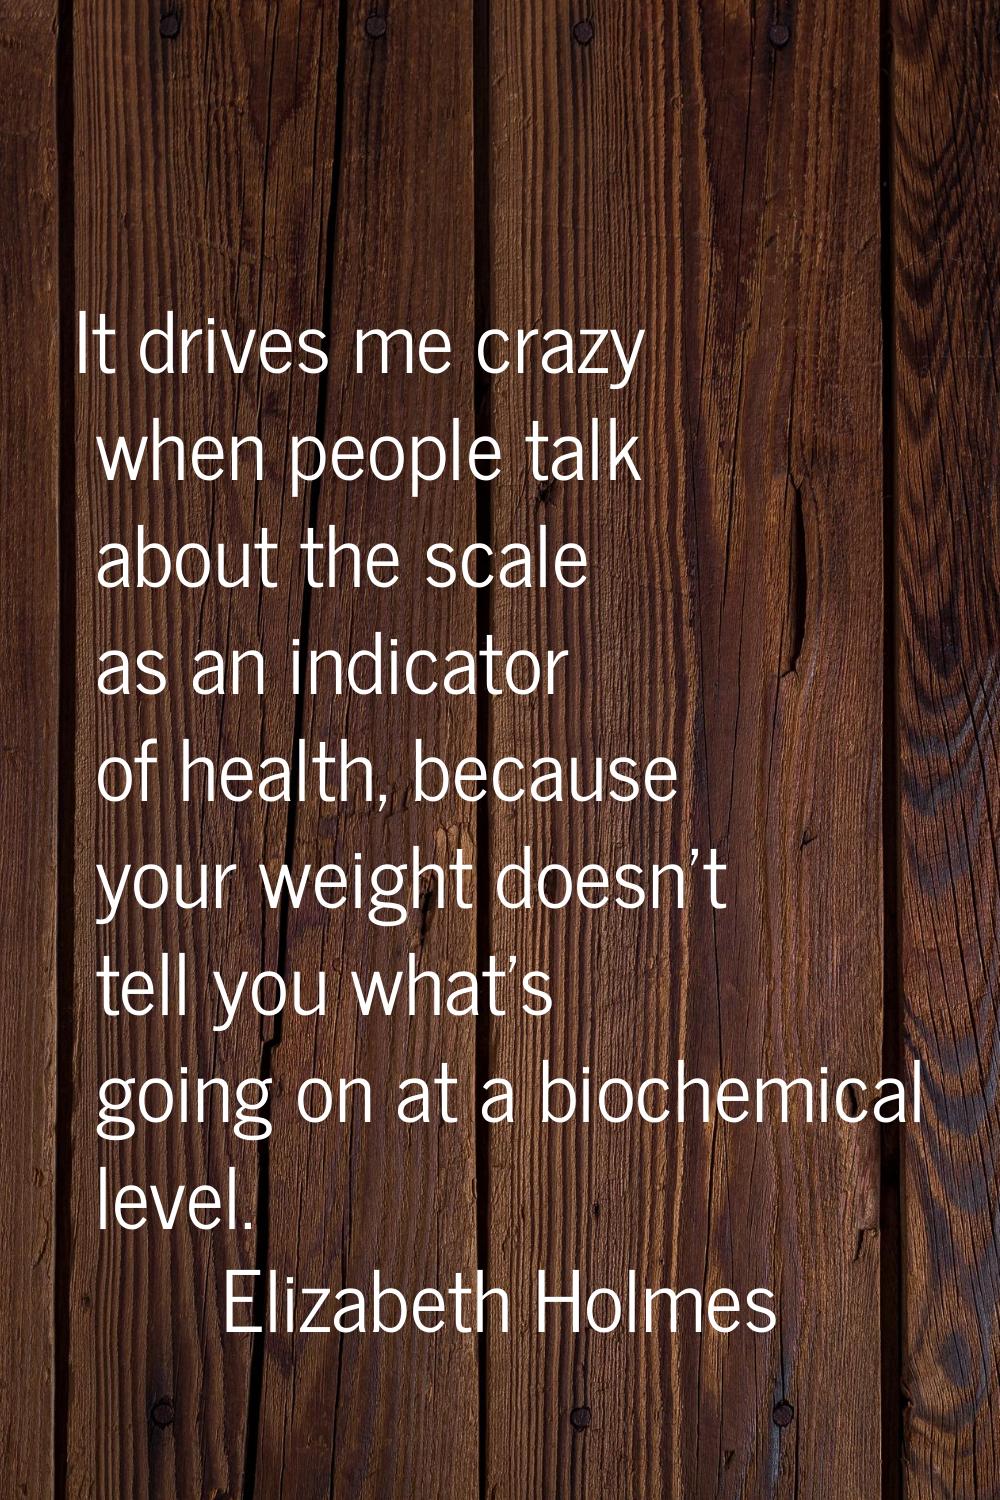 It drives me crazy when people talk about the scale as an indicator of health, because your weight 